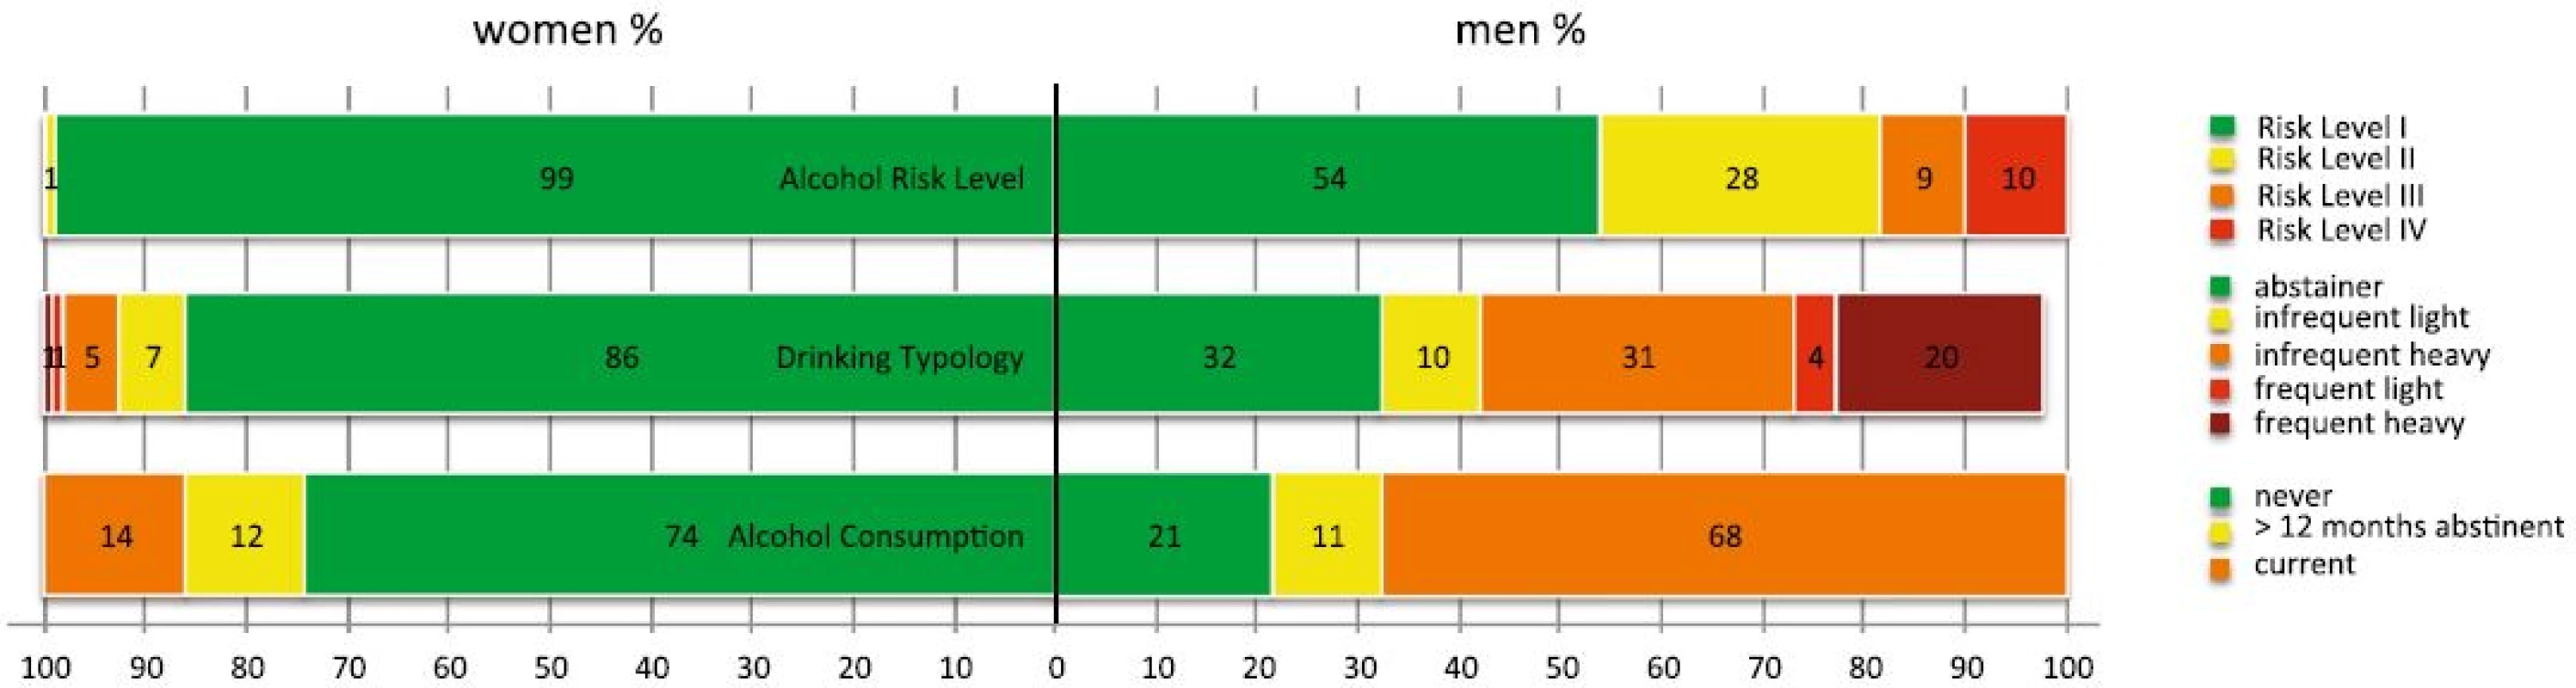 Percentages of men and women categorized according to risk levels as proposed by the AUDIT manual and drinking typology. Drinking Typologies [103] (adapted): abstainer: &lt;i&gt;never&lt;/i&gt; had a drink or had &lt;i&gt;none in the past year&lt;/i&gt;; infrequent light drinker: drinking &lt;i&gt;up to four times a month&lt;/i&gt;, always &lt;i&gt;less&lt;/i&gt; than 5 standard drinks per occasion; frequent light drinker: drinking &lt;i&gt;two or more times weekly&lt;/i&gt; and &lt;i&gt;less&lt;/i&gt; than 5 standard drinks per occasion. Infrequent heavy drinker: drinking &lt;i&gt;up to four times a month&lt;/i&gt;, sometimes &lt;i&gt;6 or more&lt;/i&gt; standard drinks per occasion. Frequent heavy drinker: drinking &lt;i&gt;two or more times weekly&lt;/i&gt; and &lt;i&gt;5 or more&lt;/i&gt; standard drinks per occasion. We were not able to categorize 2 % (&lt;i&gt;n&lt;/i&gt; = 7) of the males since they did not fit in any category. Six men were frequent light drinkers, but had binges of 6 or more standard drinks less than monthly or monthly. One male drank infrequently, but always 5 standard drinks per occasion, he never had binges of 6 or more standard drinks